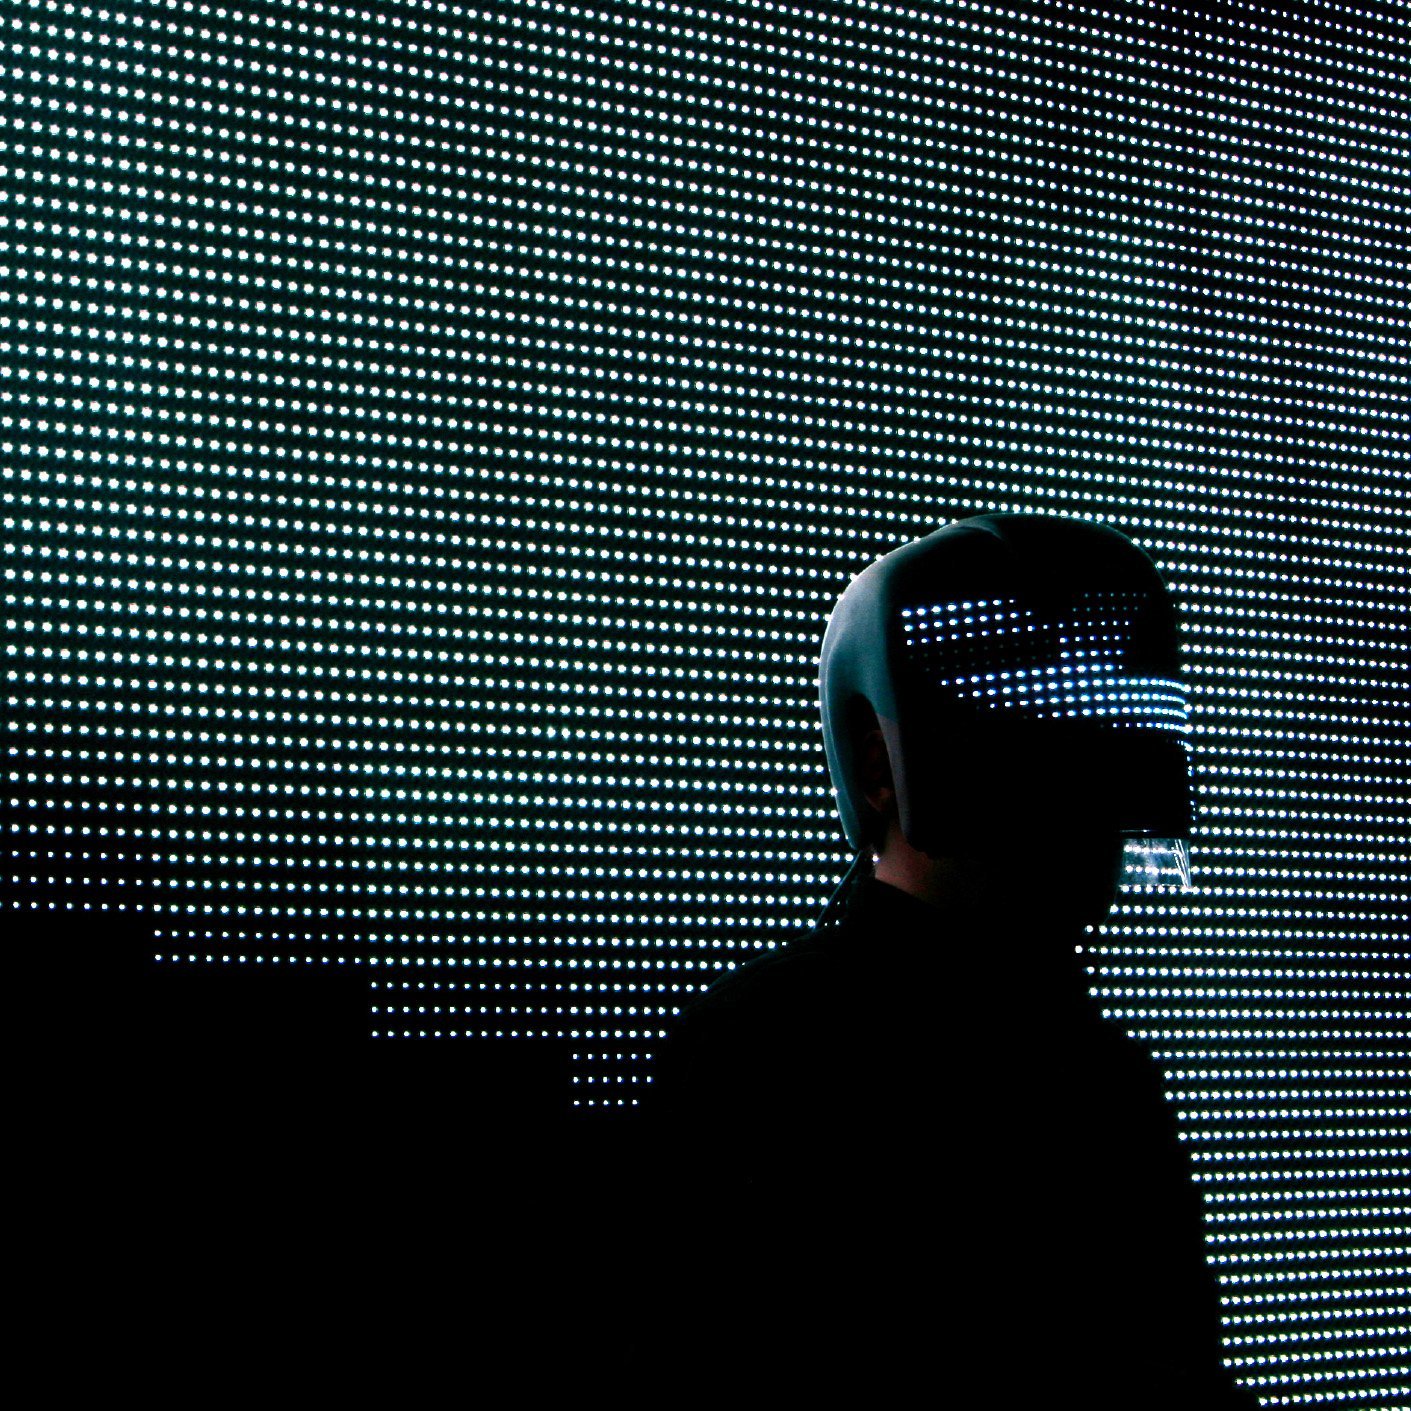 News Added Mar 30, 2012 Ufabulum, the long awaited new album from the genre-bending pioneer Squarepusher is going to be released on May 15th and as he told in an interview with the Creators Project this is going to be the first album on which he allows for collaborations. He claims the album will be […]